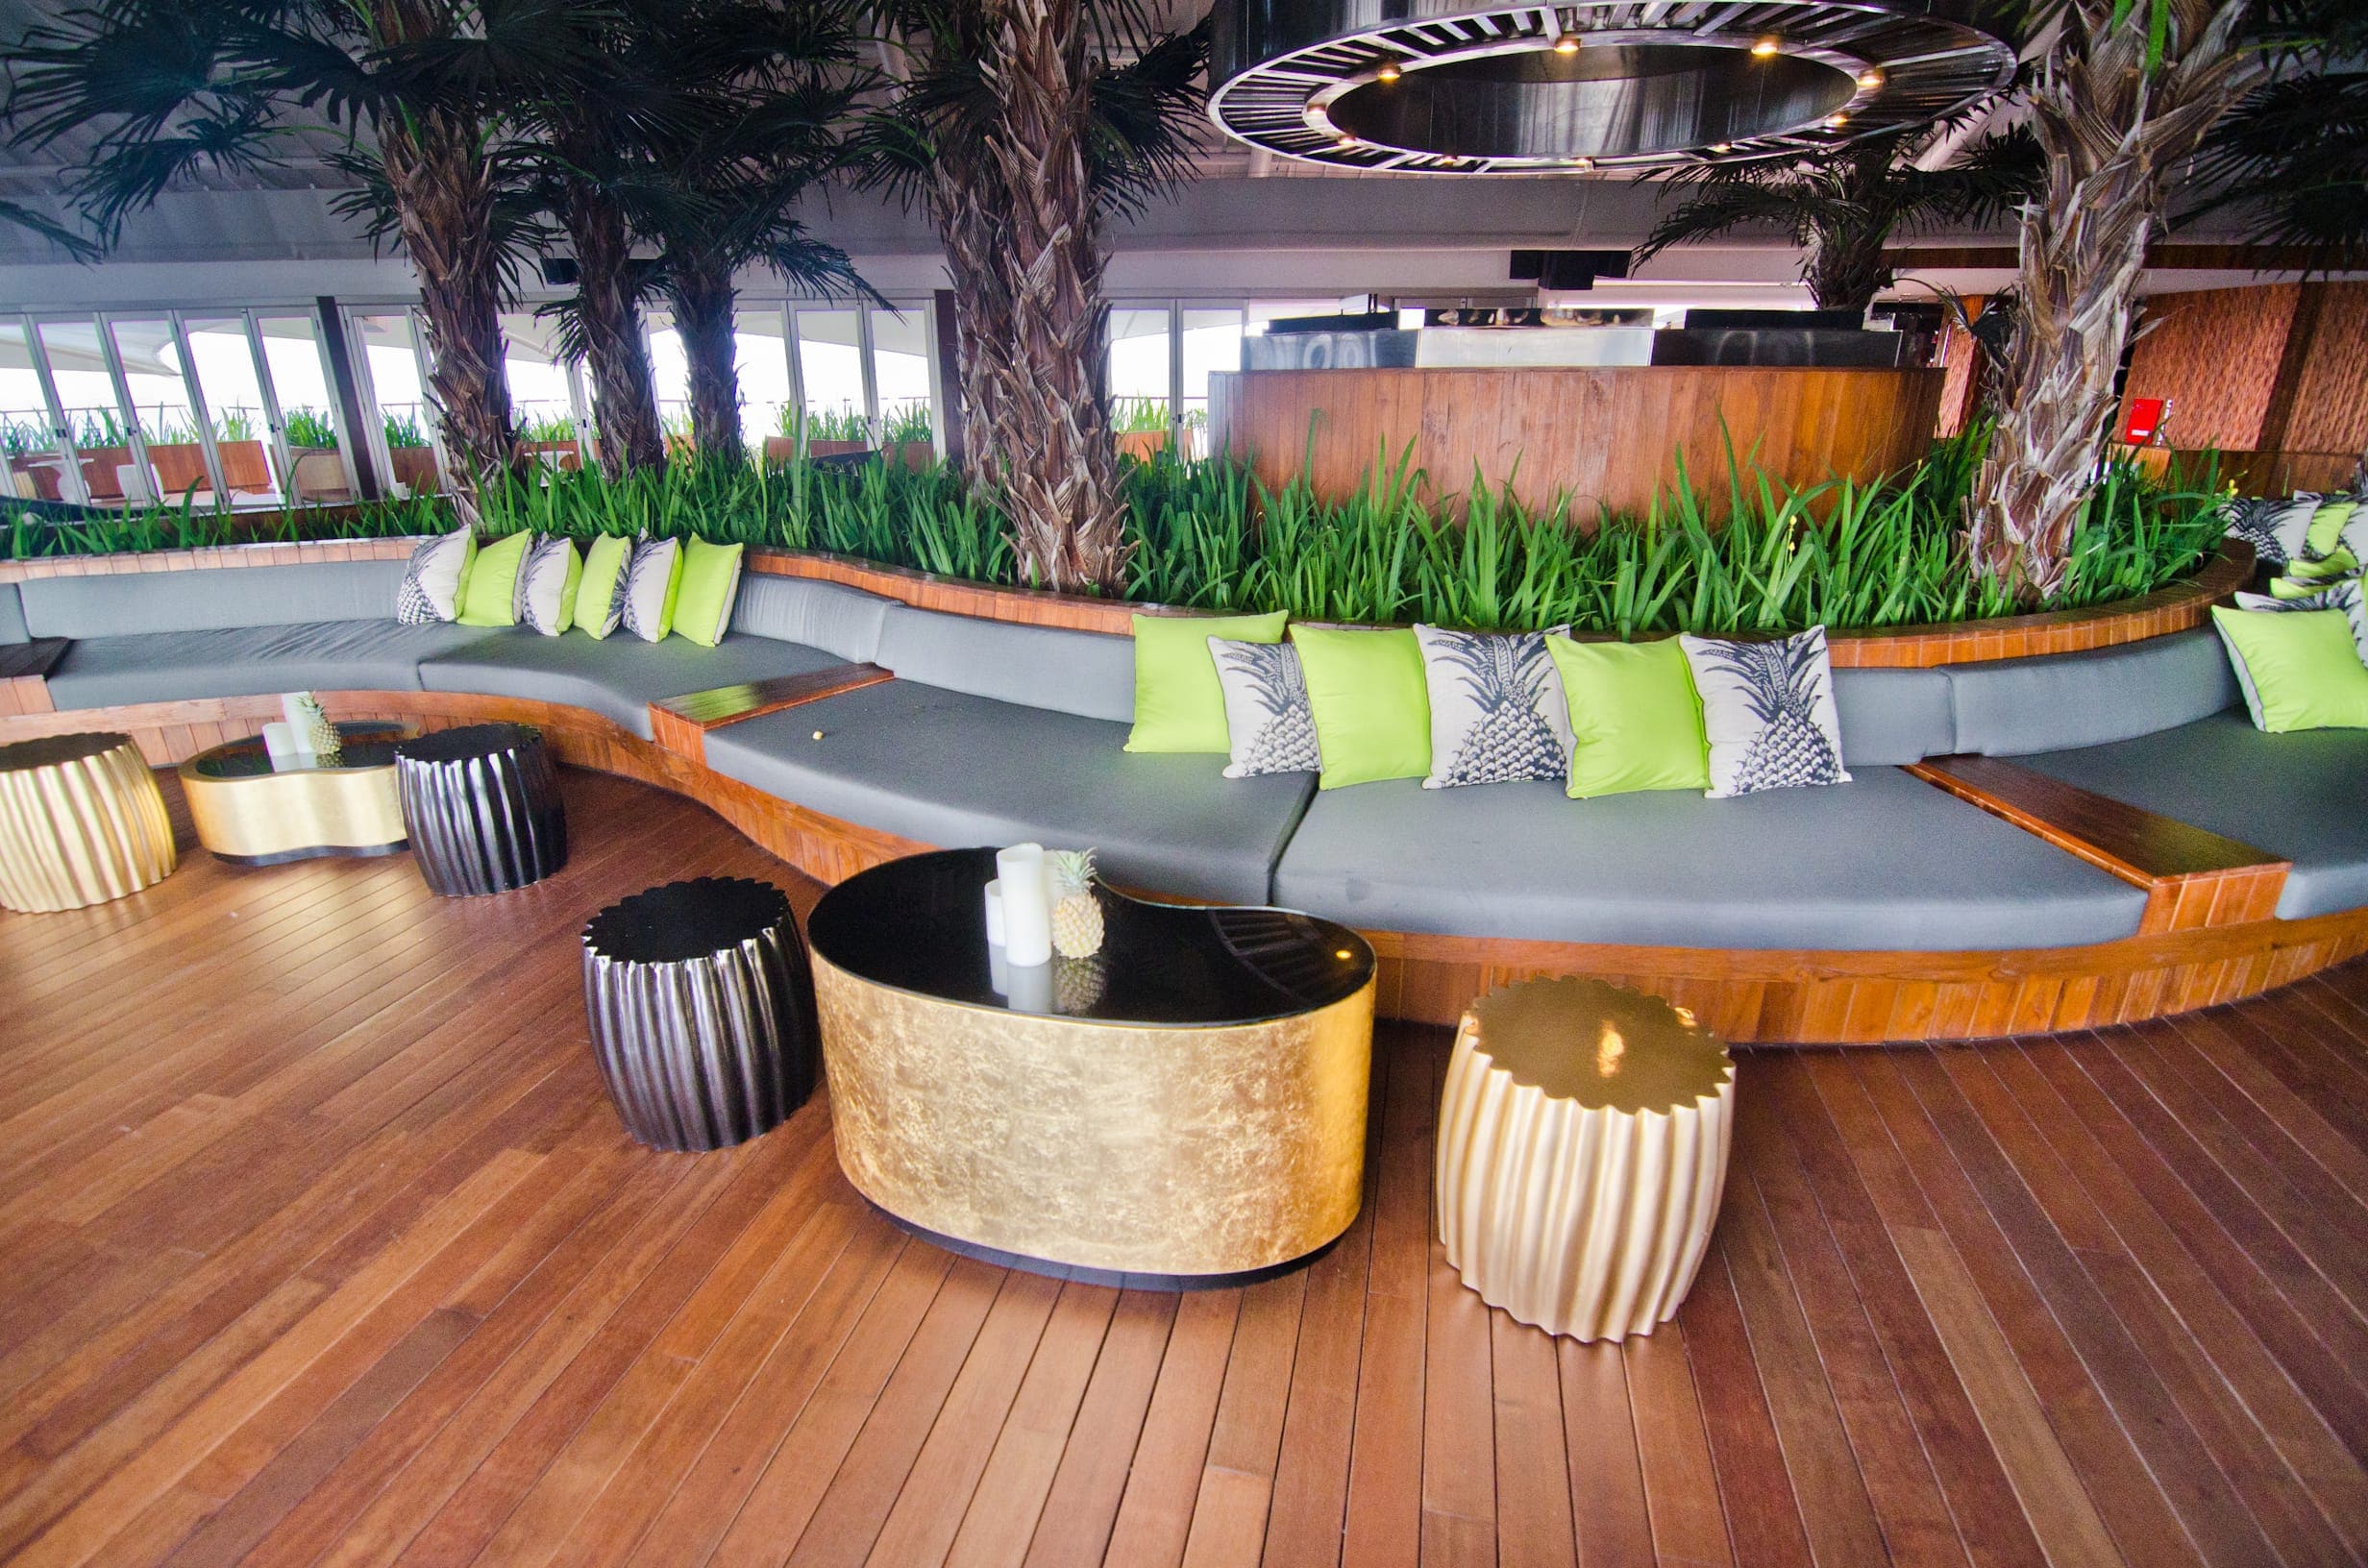 Terrasse en bois merbau - bois exotique - Double Six 66 Luxury Hostel in Bali Indonesia with wood decking Softline Merbau without visible fixations decking system